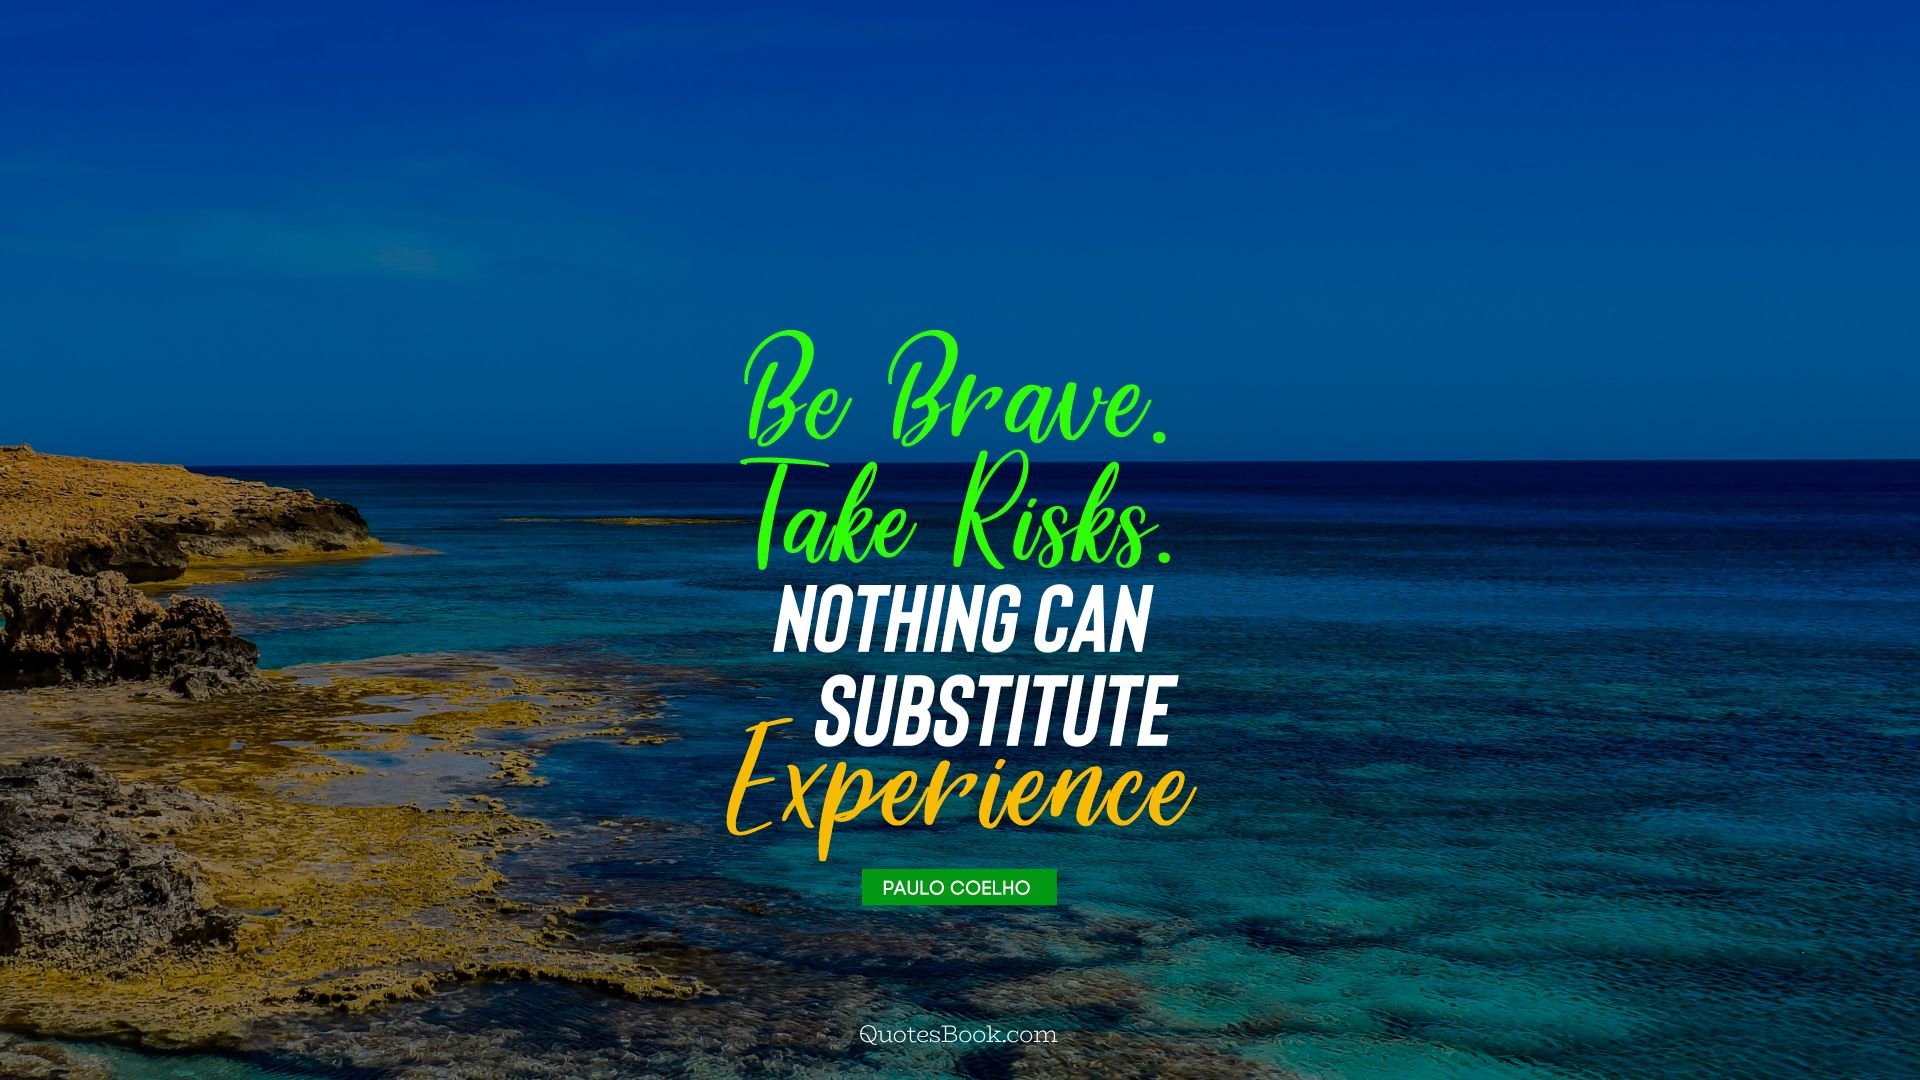 Be brave.Take risks.Nothing can substitute experience. - Quote by Paulo Coelho